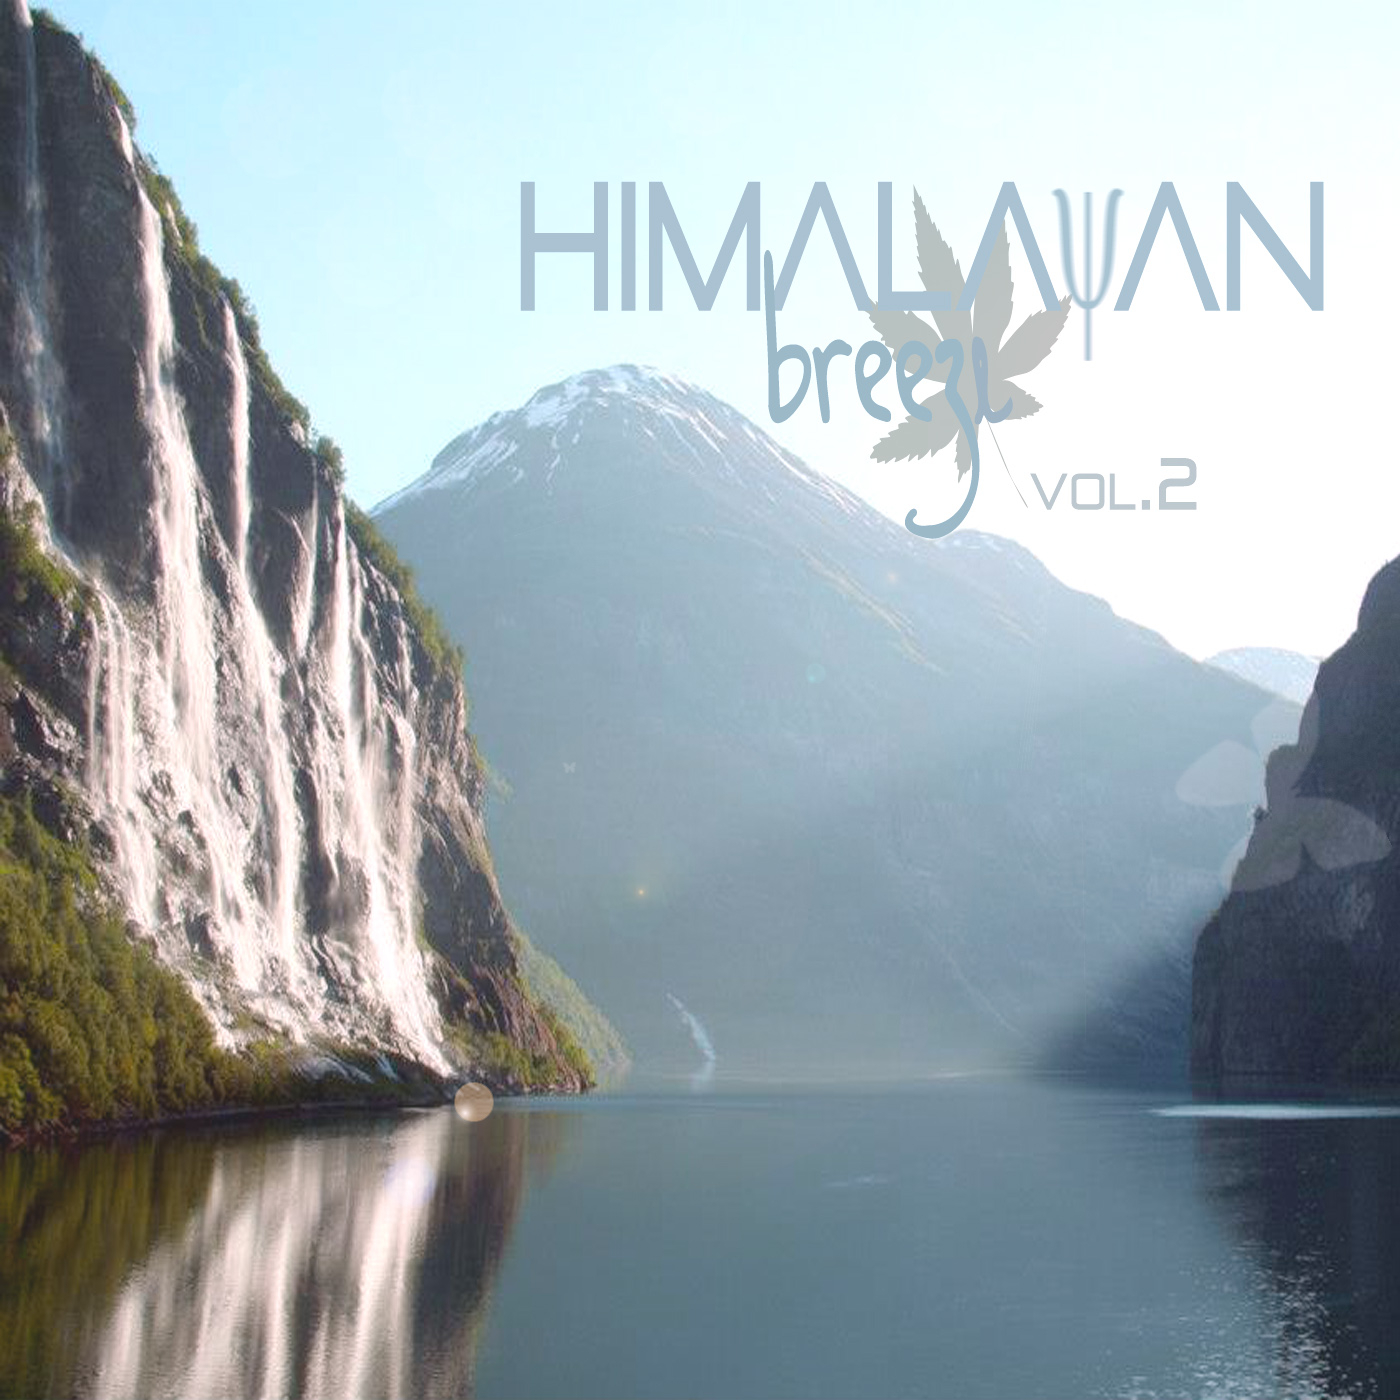 Himalayan Breeze, Vol. 2 (The Sound of Buddha Compiled by DJ MNX)